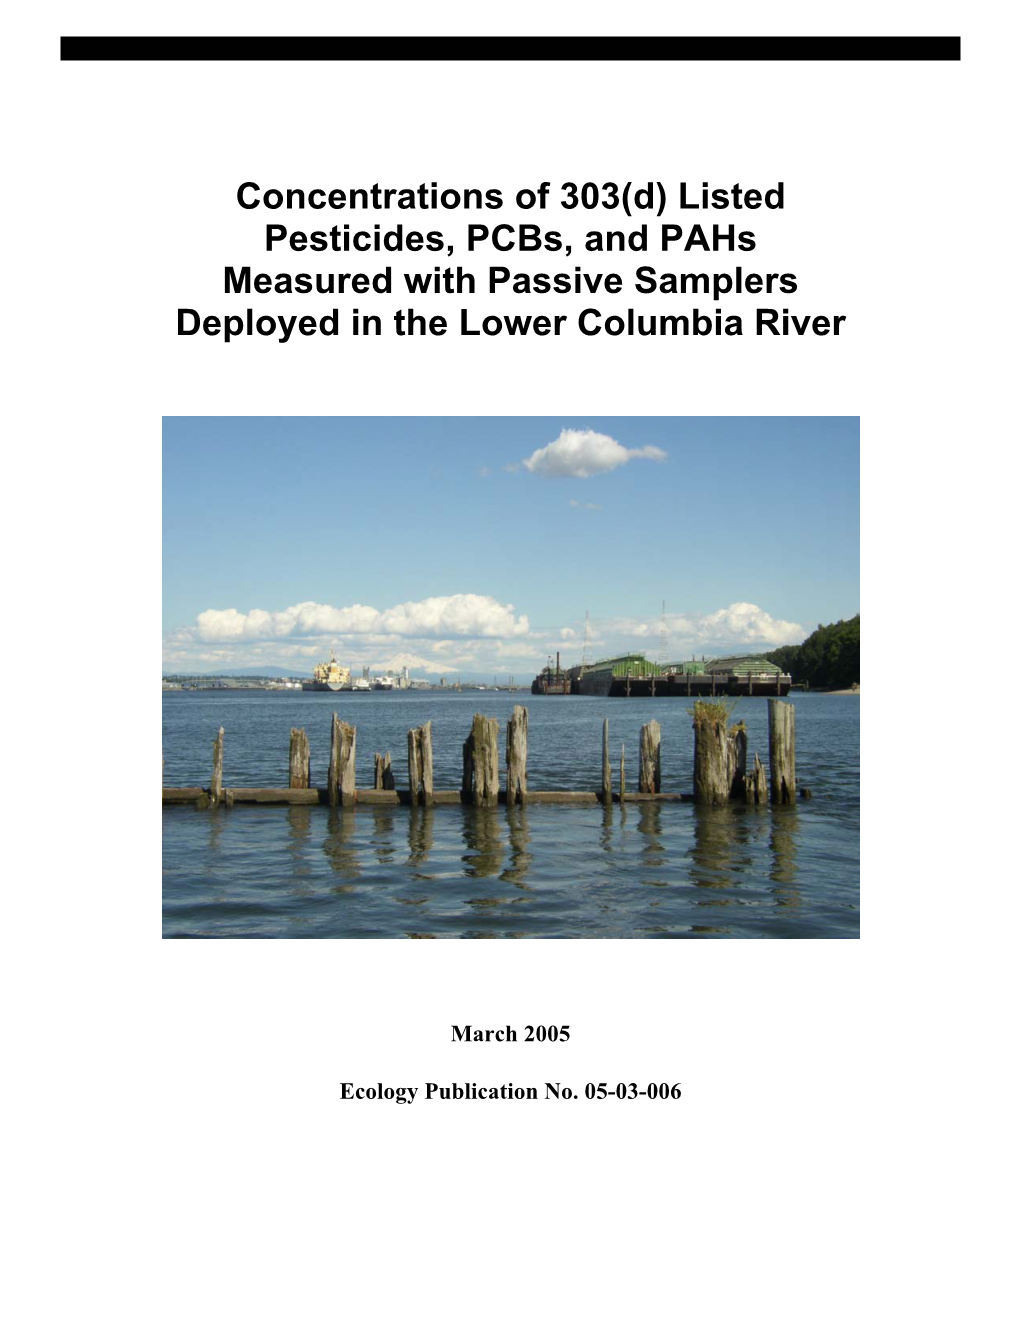 Listed Pesticides, Pcbs, and Pahs Measured with Passive Samplers Deployed in Lower Columbia River